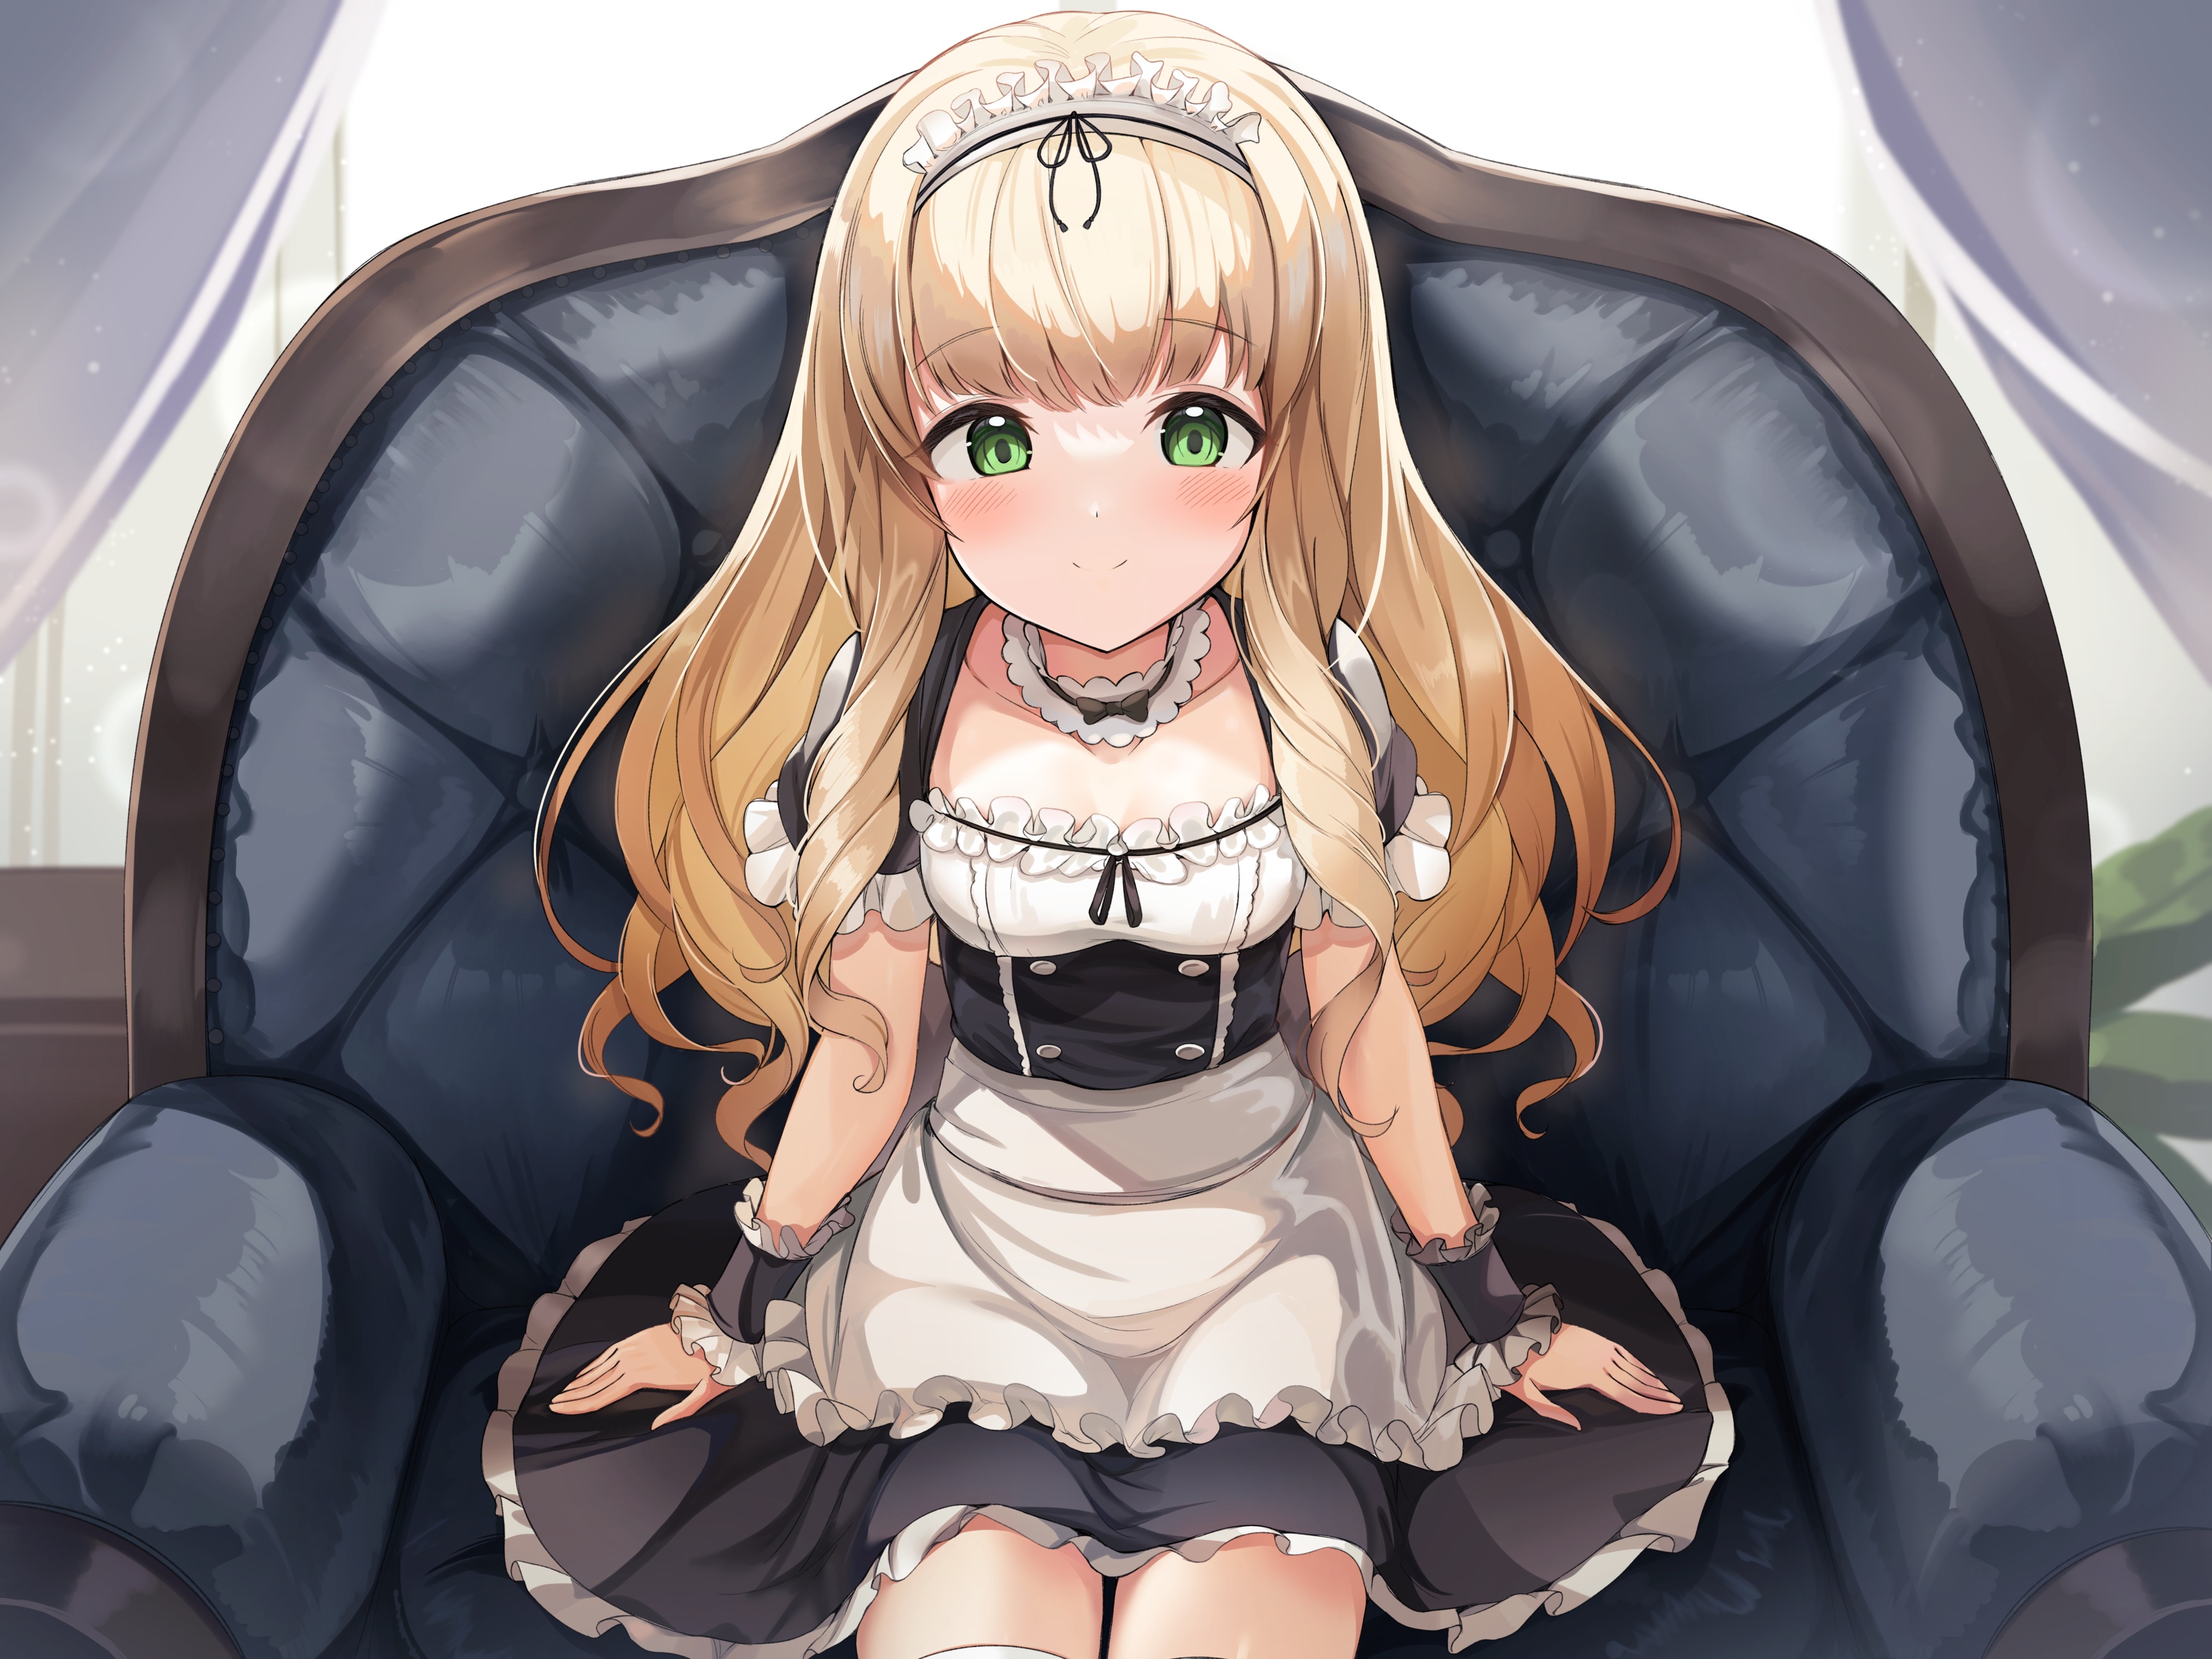 Anime 3500x2625 anime anime girls smiling green eyes blonde maid maid outfit long hair Ohshit artwork